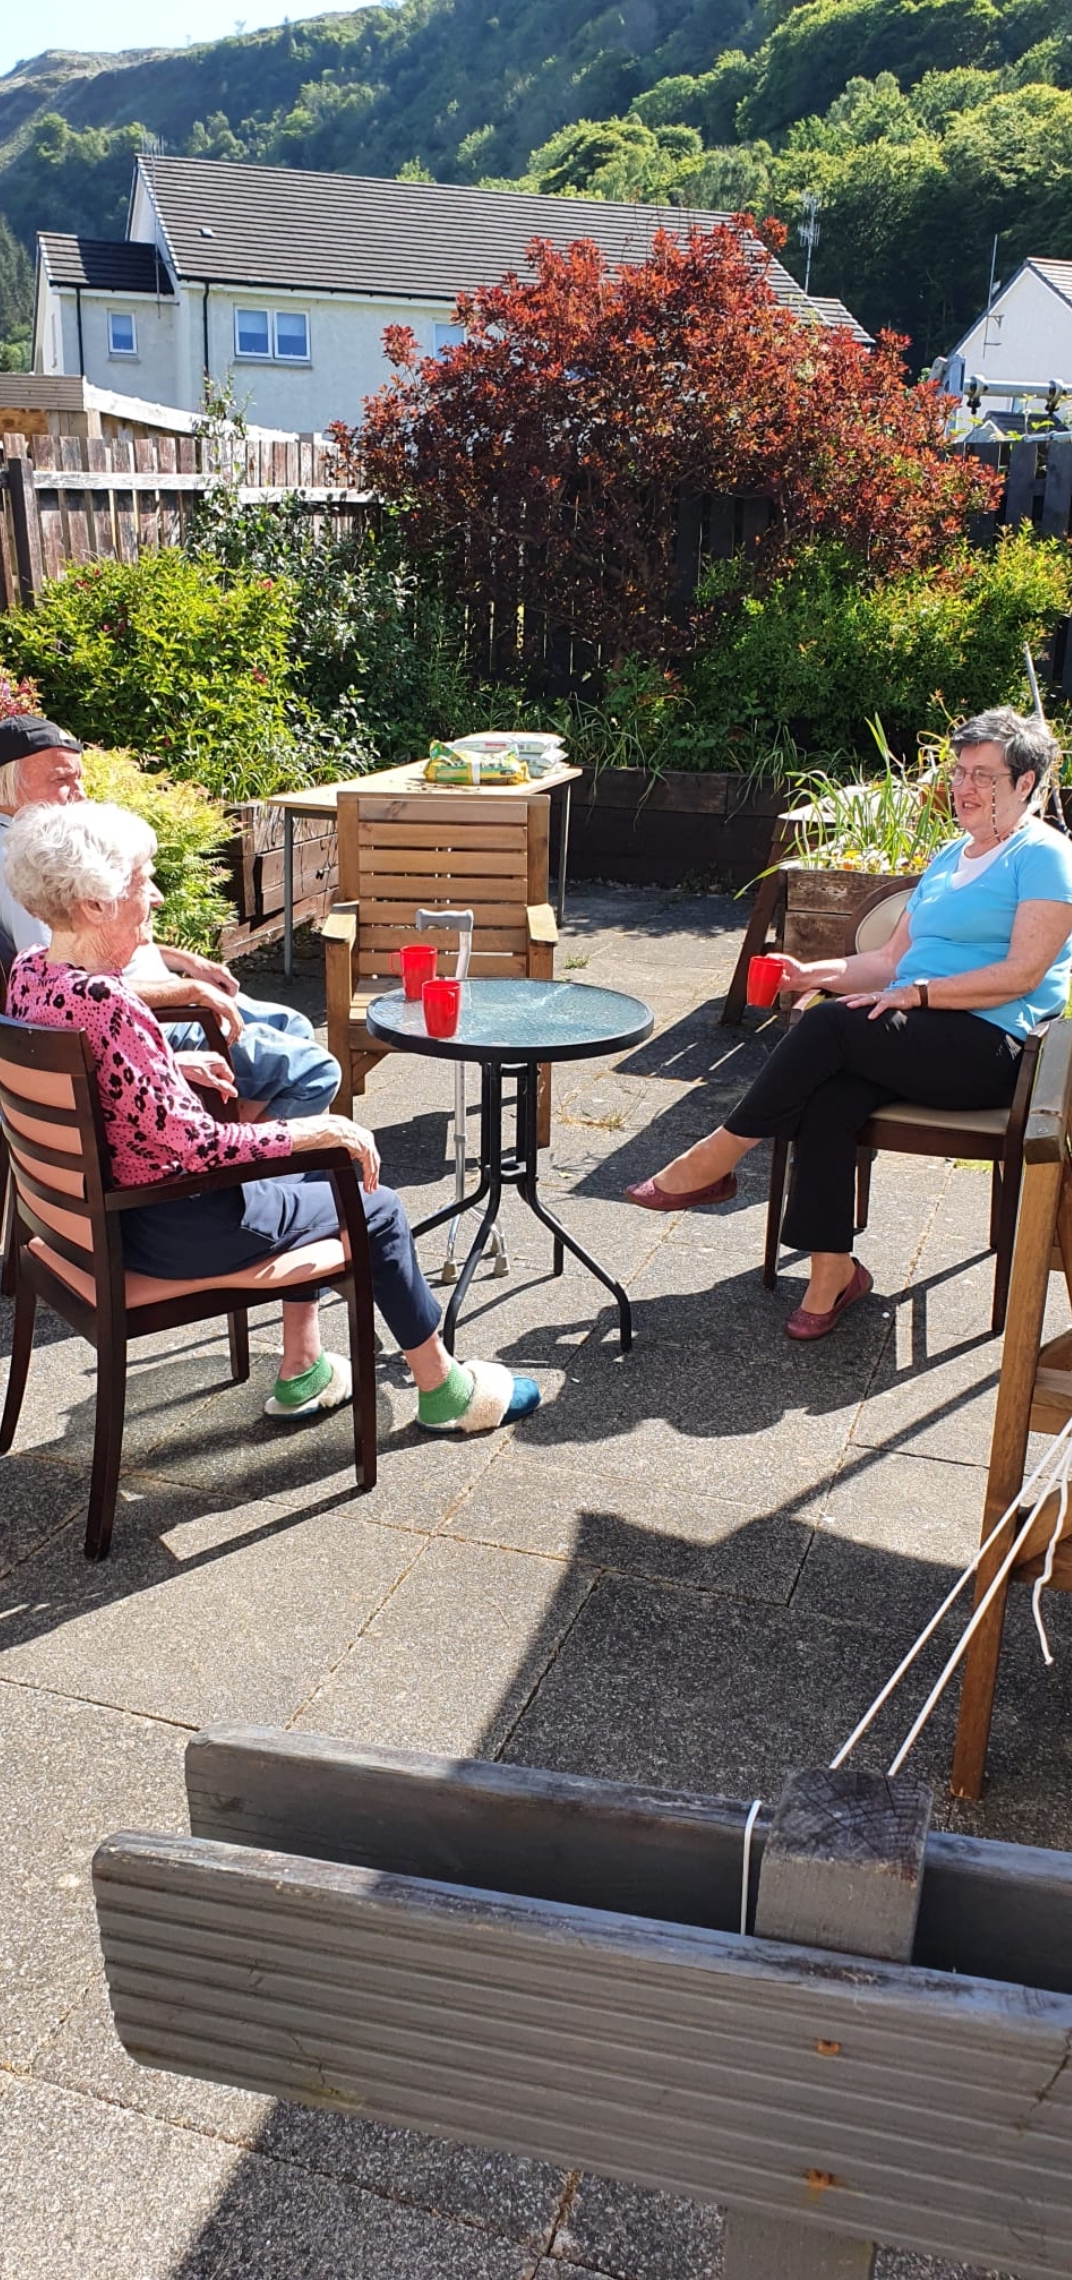 Residents Chatting in The Garden